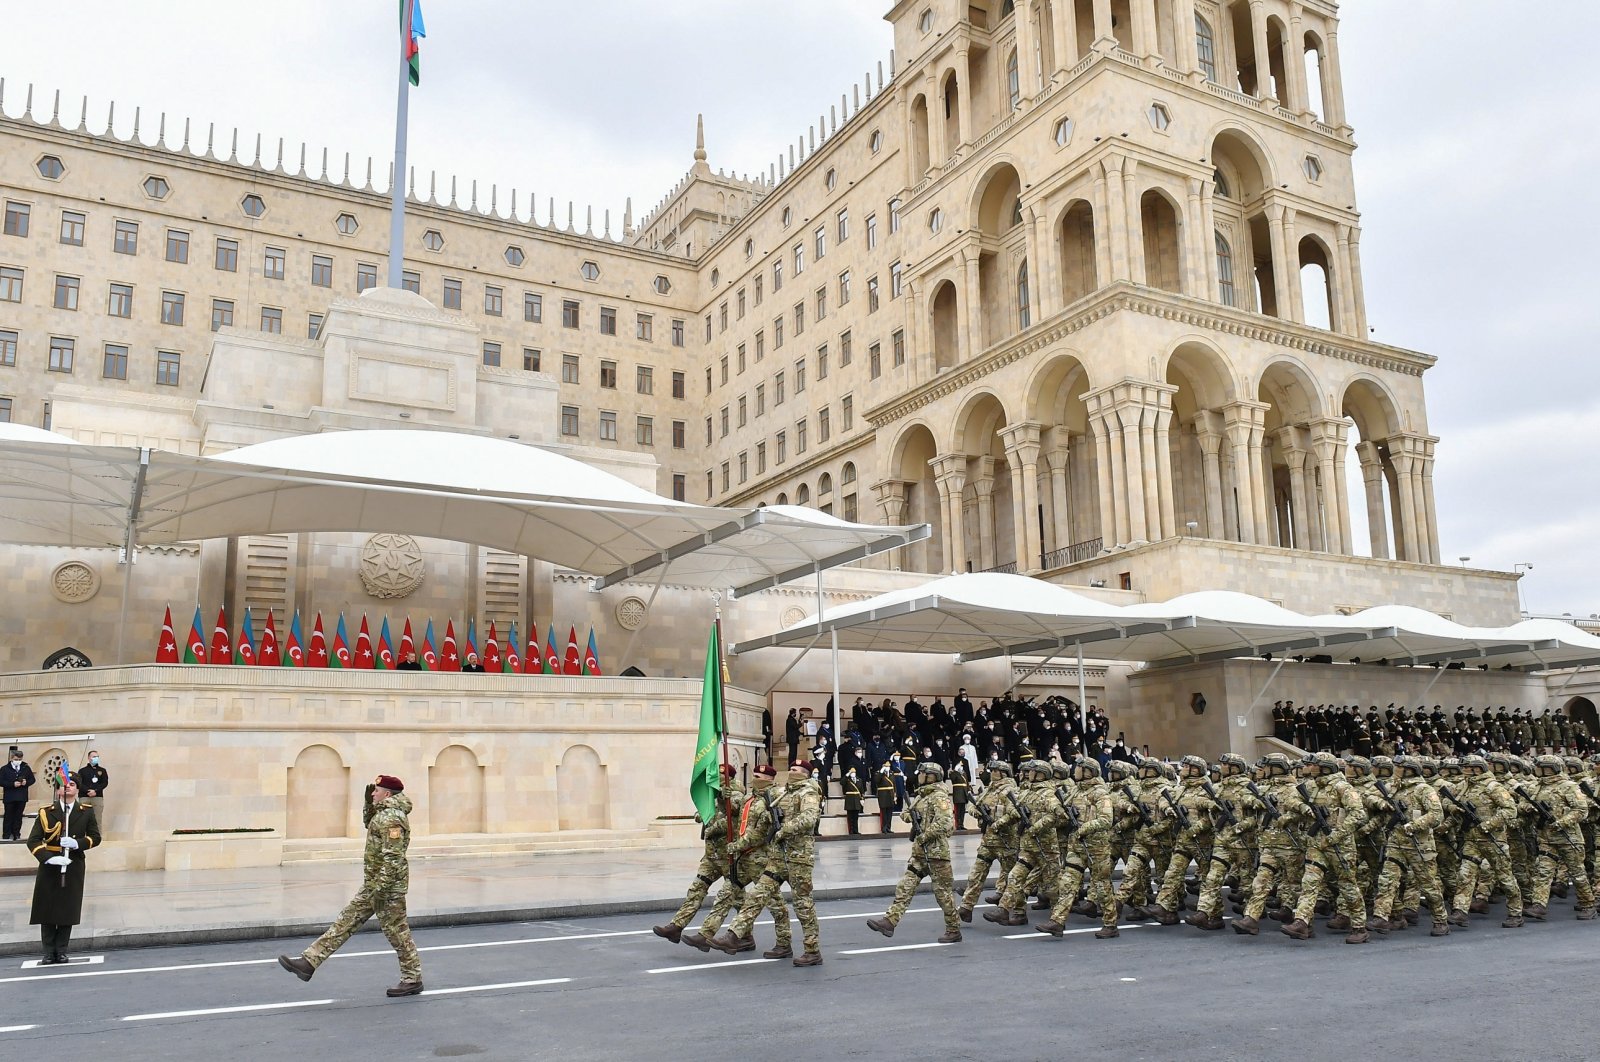 Azerbaijani military marches during a military parade dedicated to the victory in the recent Nagorno-Karabakh conflict, with the presence of visiting Turkish President Recep Tayyip Erdoğan, in Baku, Azerbaijan, Dec. 10, 2020. (EPA Photo)